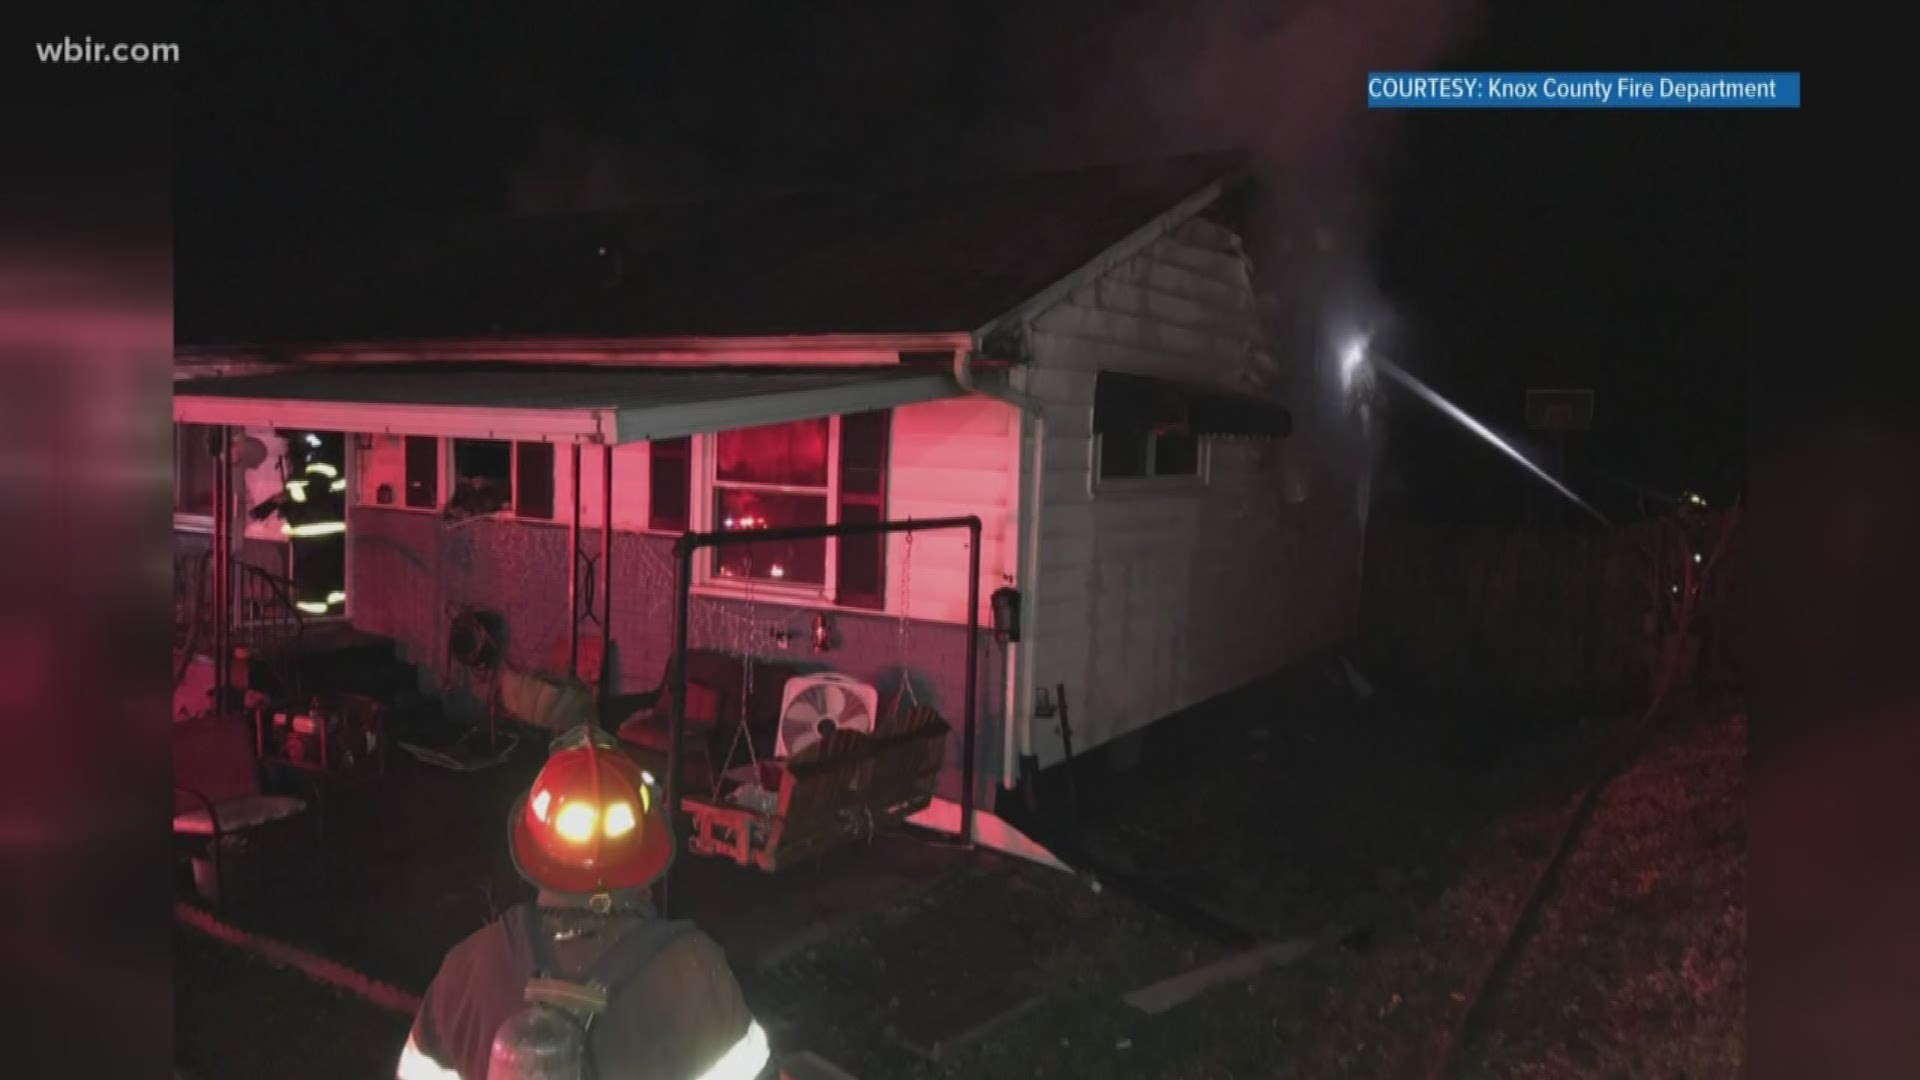 Knoxville Fire Department said the fire occurred just before 4:30 a.m. Sunday. No one was home at the time and there are no reported injuries, according to KFD.